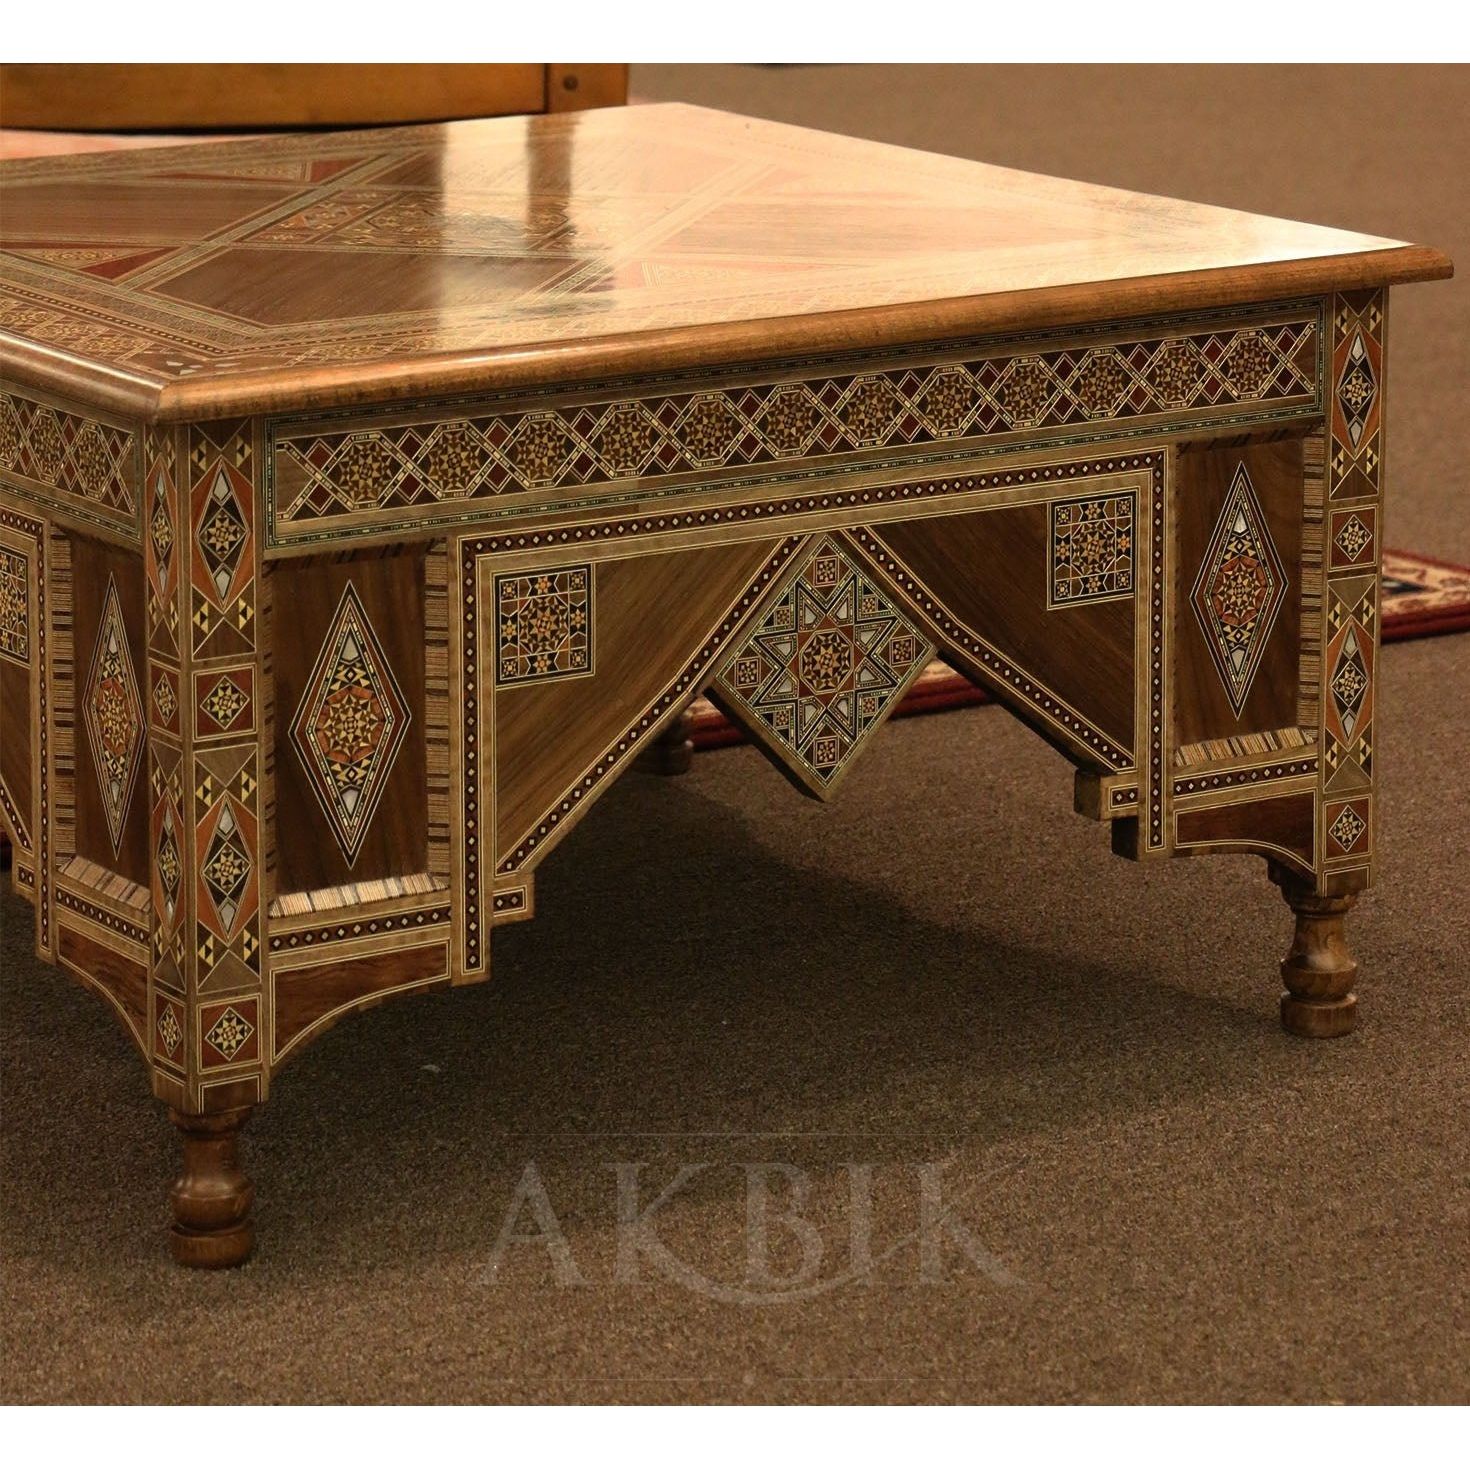 MELODY MARQUETRY TABLE - AKBIK Furniture & Design